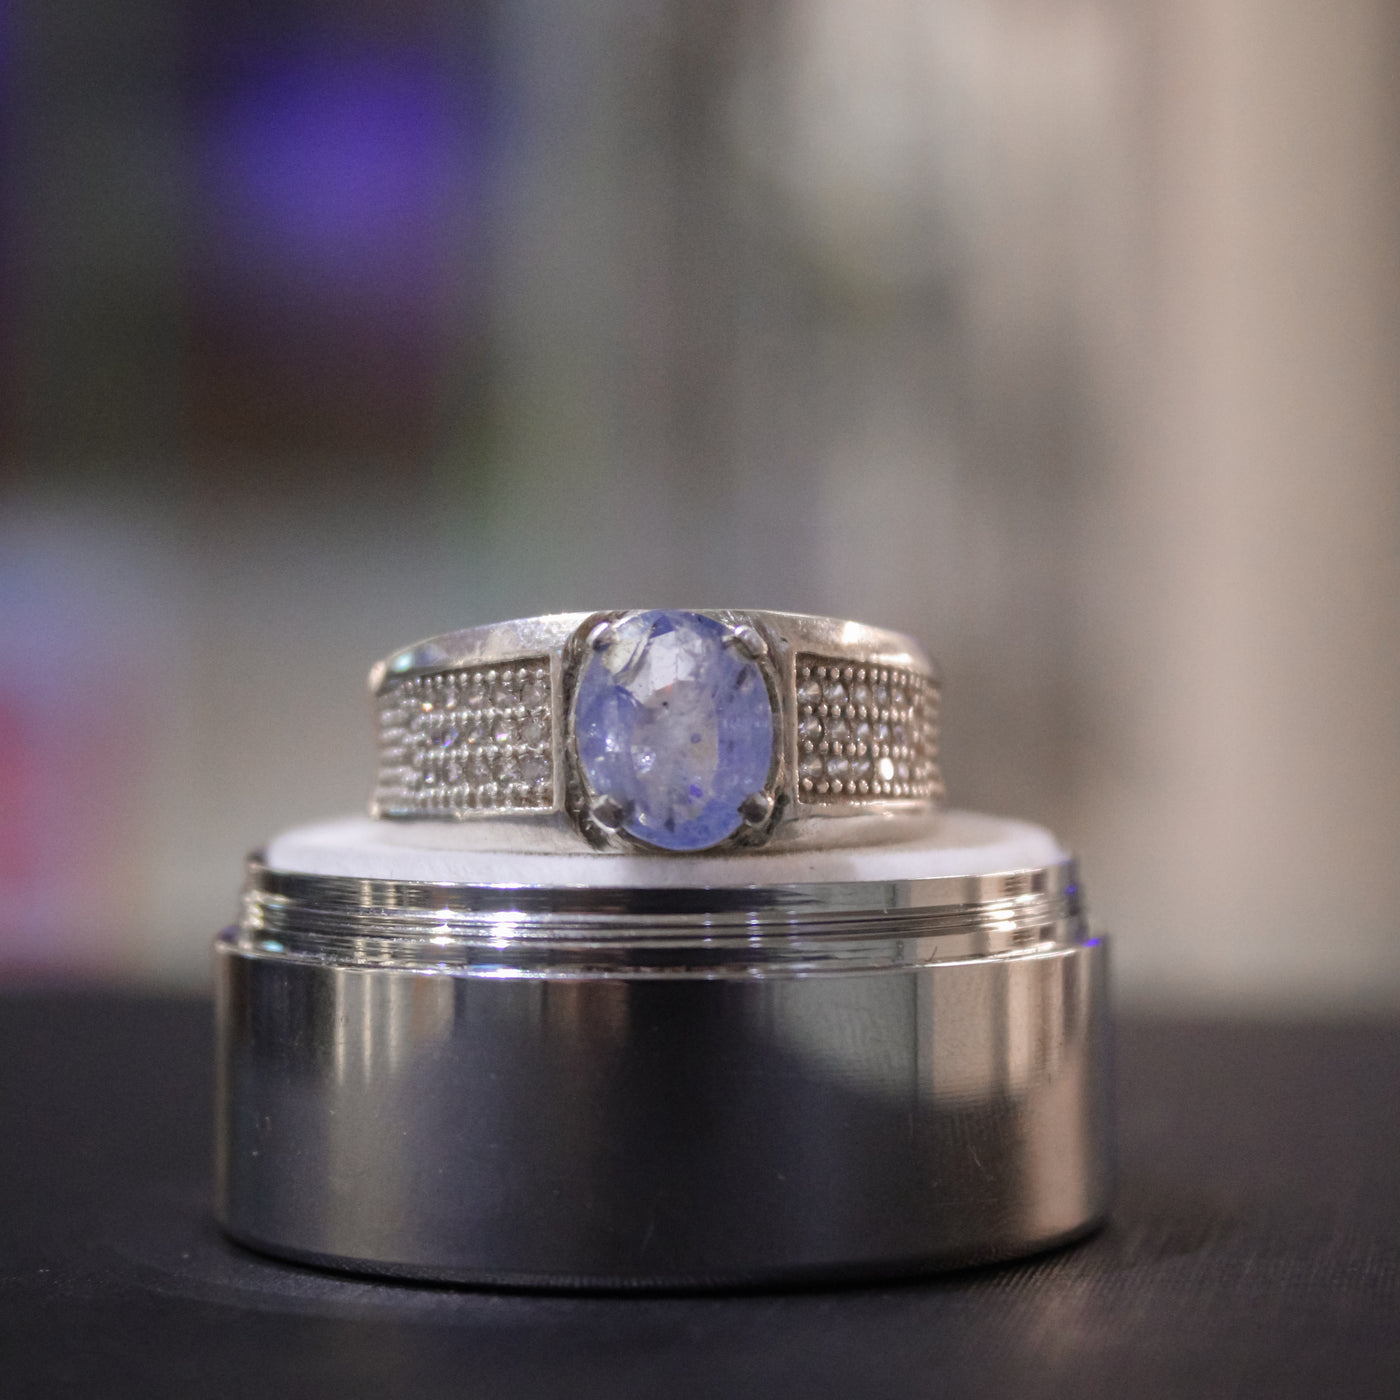 Buy premium quality,1.92carats blue Sapphire with Silver Female Ring